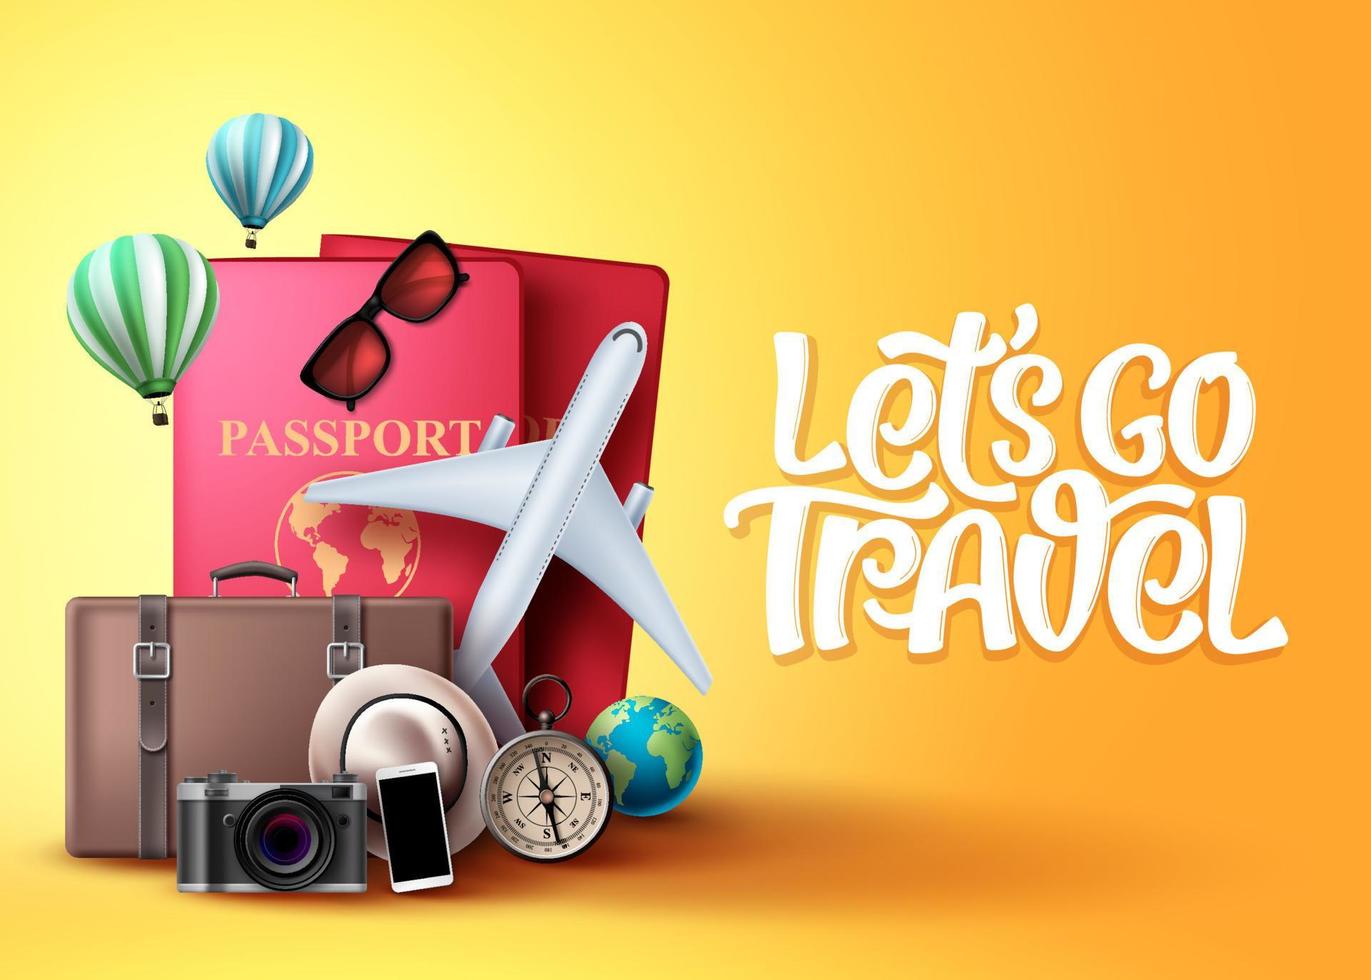 Let's go travel vector background design. Travel and tour elements in yellow background with travelers passport, suitcase bag, compass, camera and air balloons.